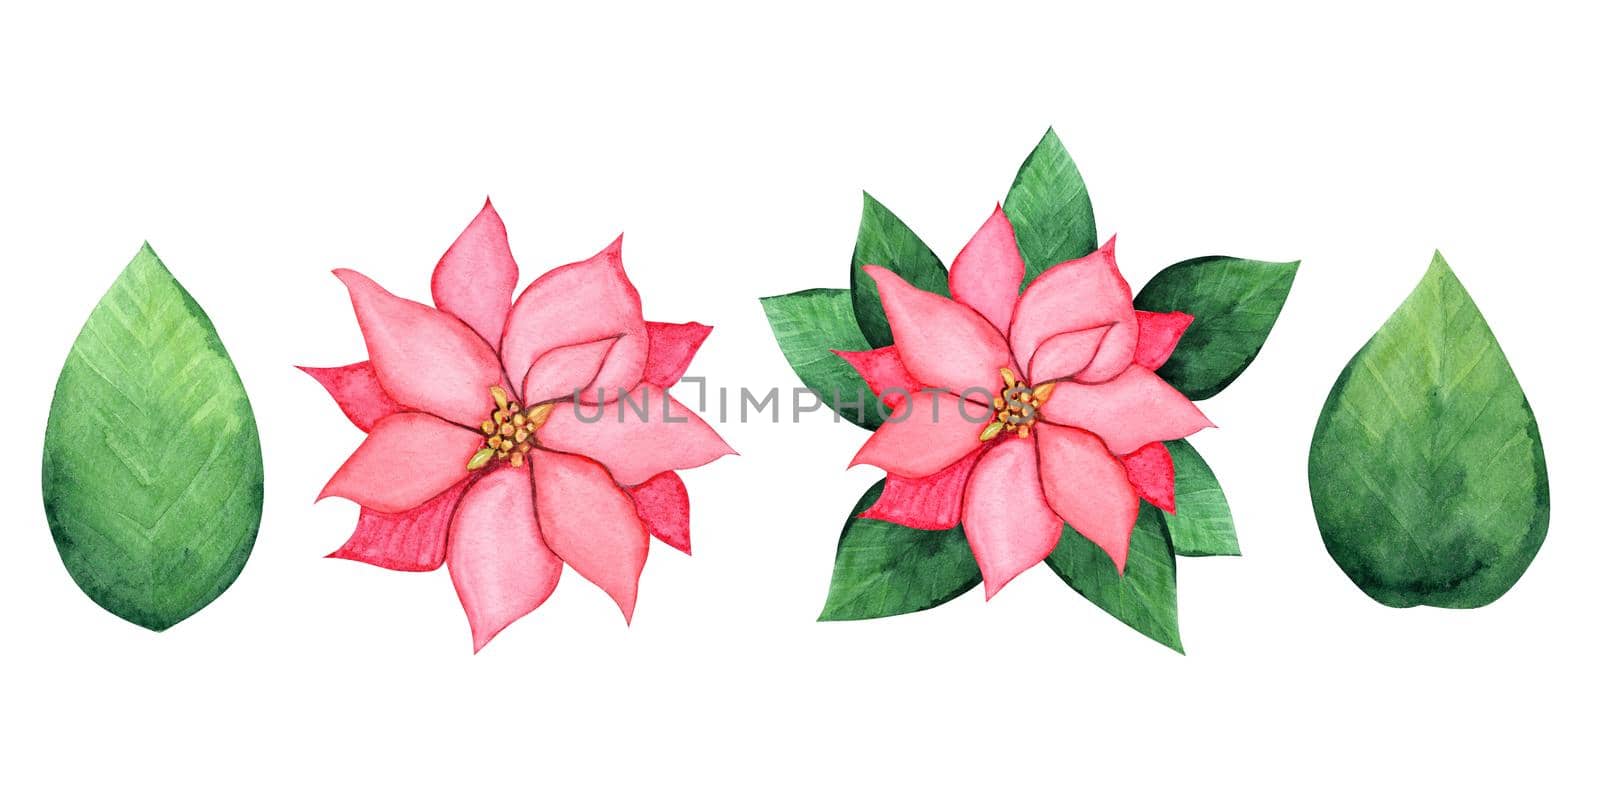 Watercolor poinsettia set isolated on white background. Christmas leaves and flowers hand drawn illustration